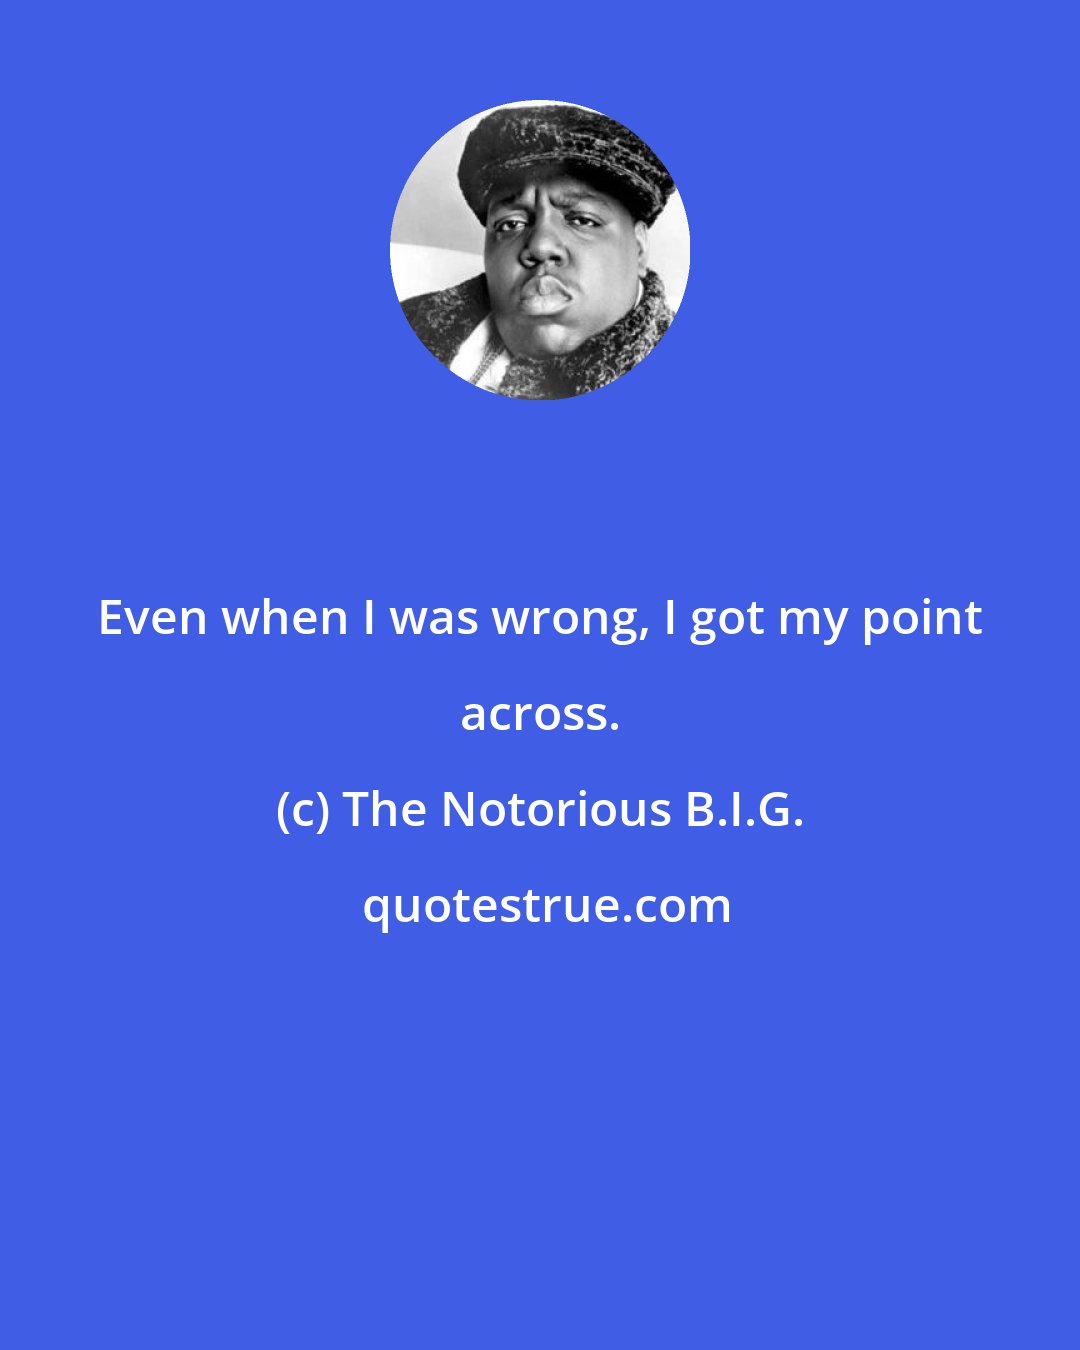 The Notorious B.I.G.: Even when I was wrong, I got my point across.